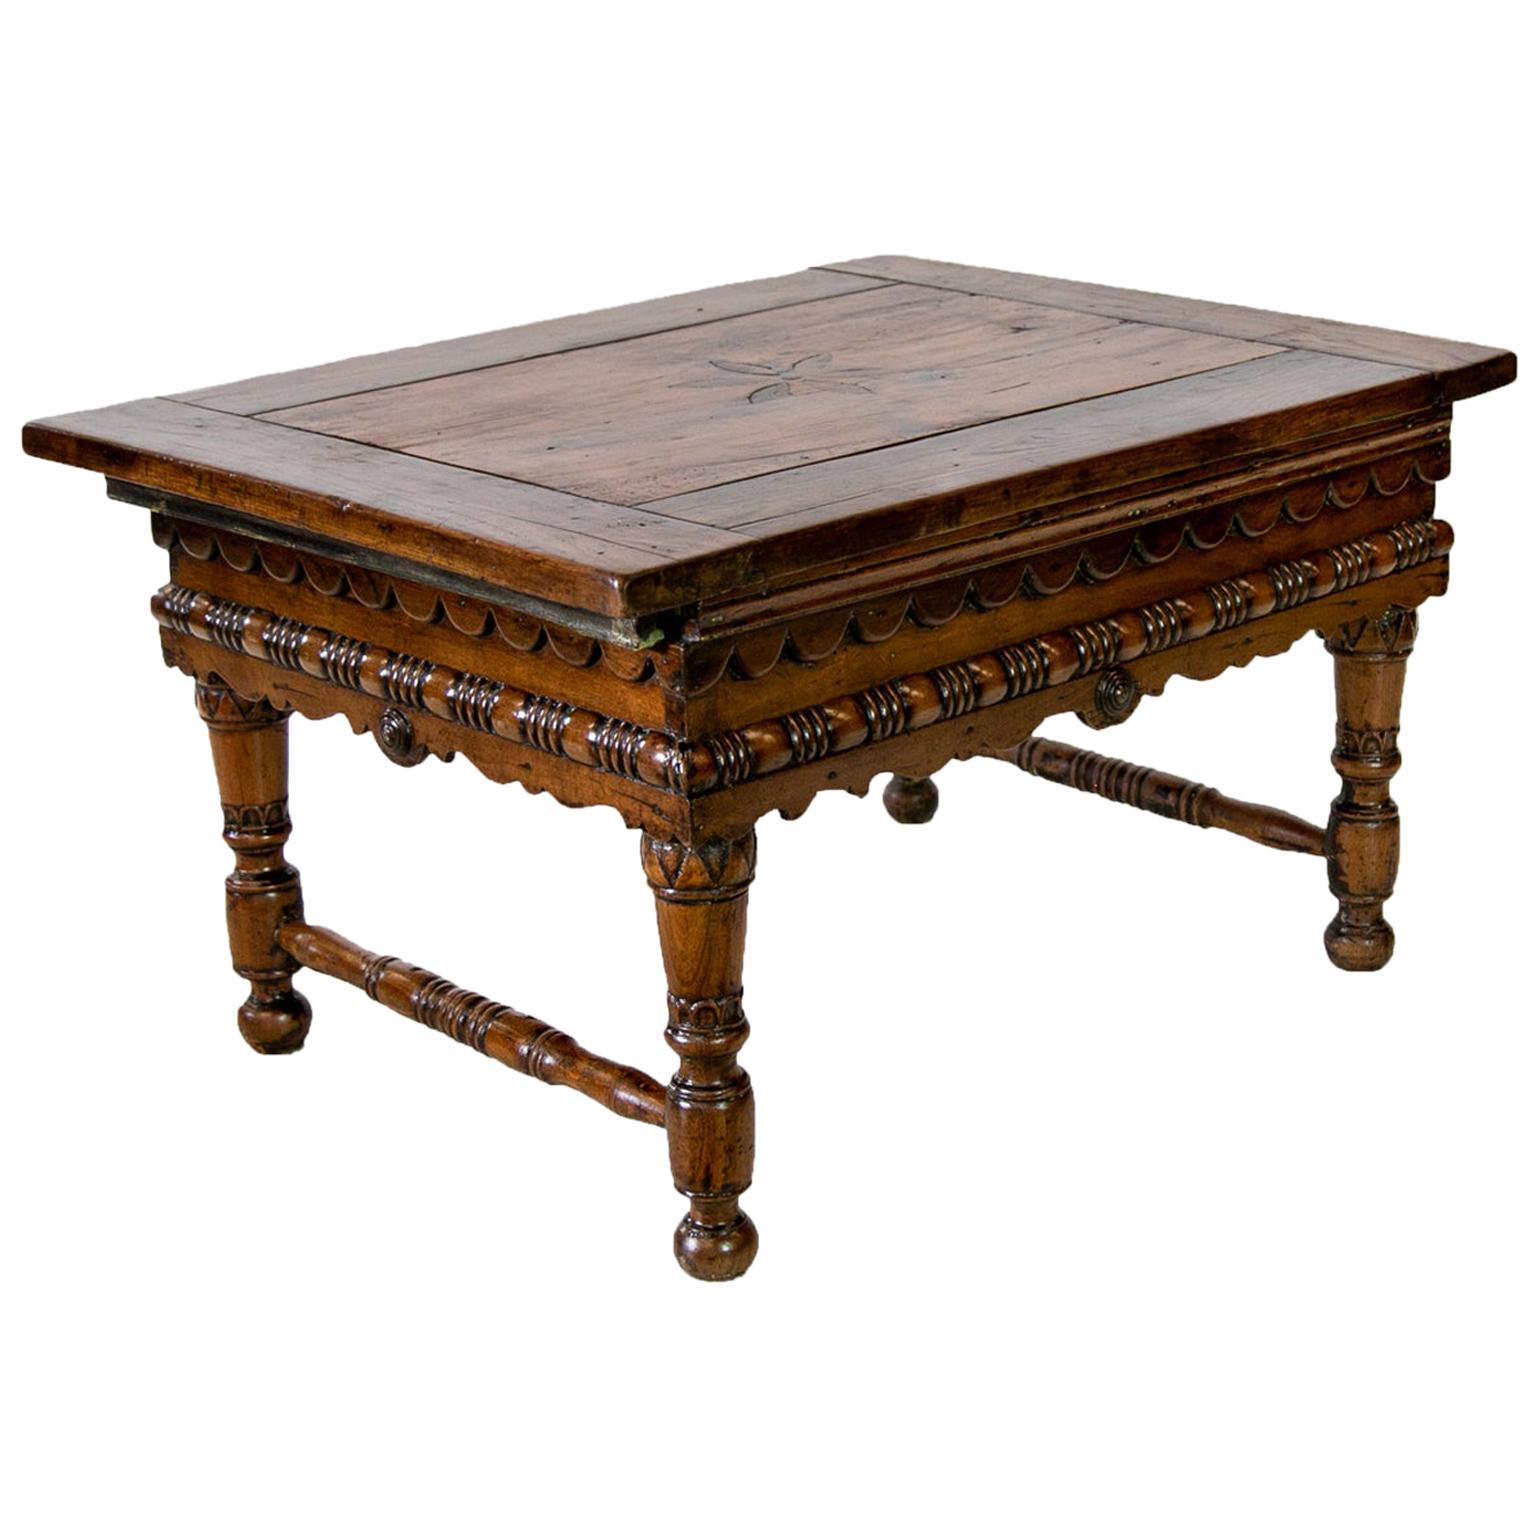 European inlaid fruitwood coffee table, with the center panel having an inlaid stylized flower framed by four thick batten boards. The top is designed to slide in either direction to expose an interior storage compartment. The apron has a repeating